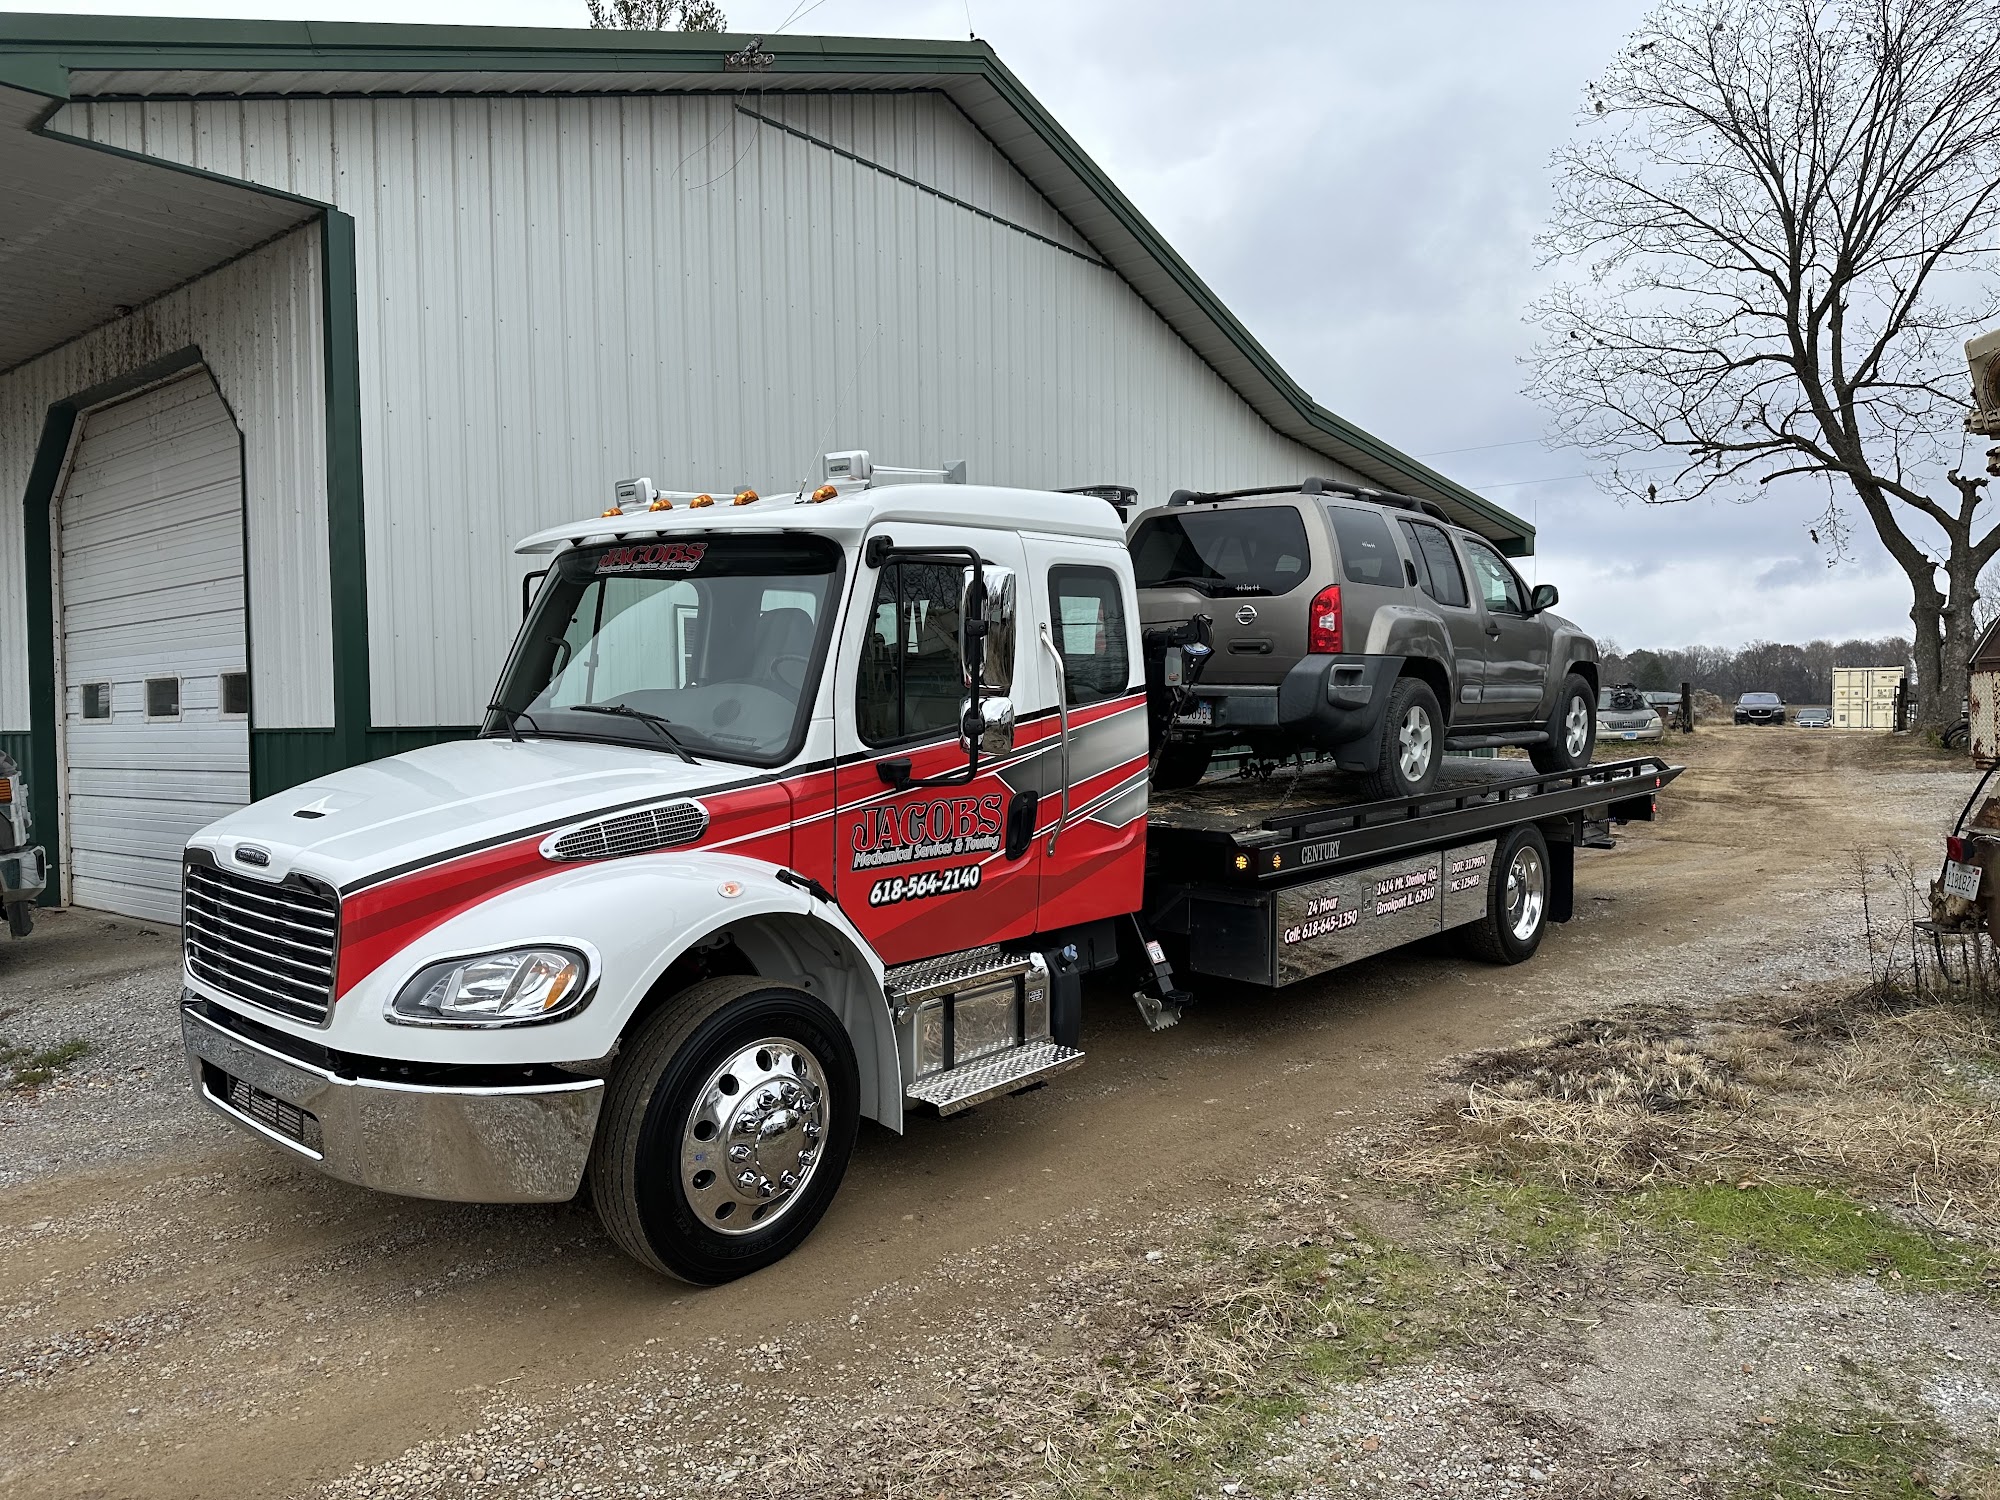 Jacobs Mechanical Services & Towing 1414 Mt Sterling Rd, Brookport Illinois 62910